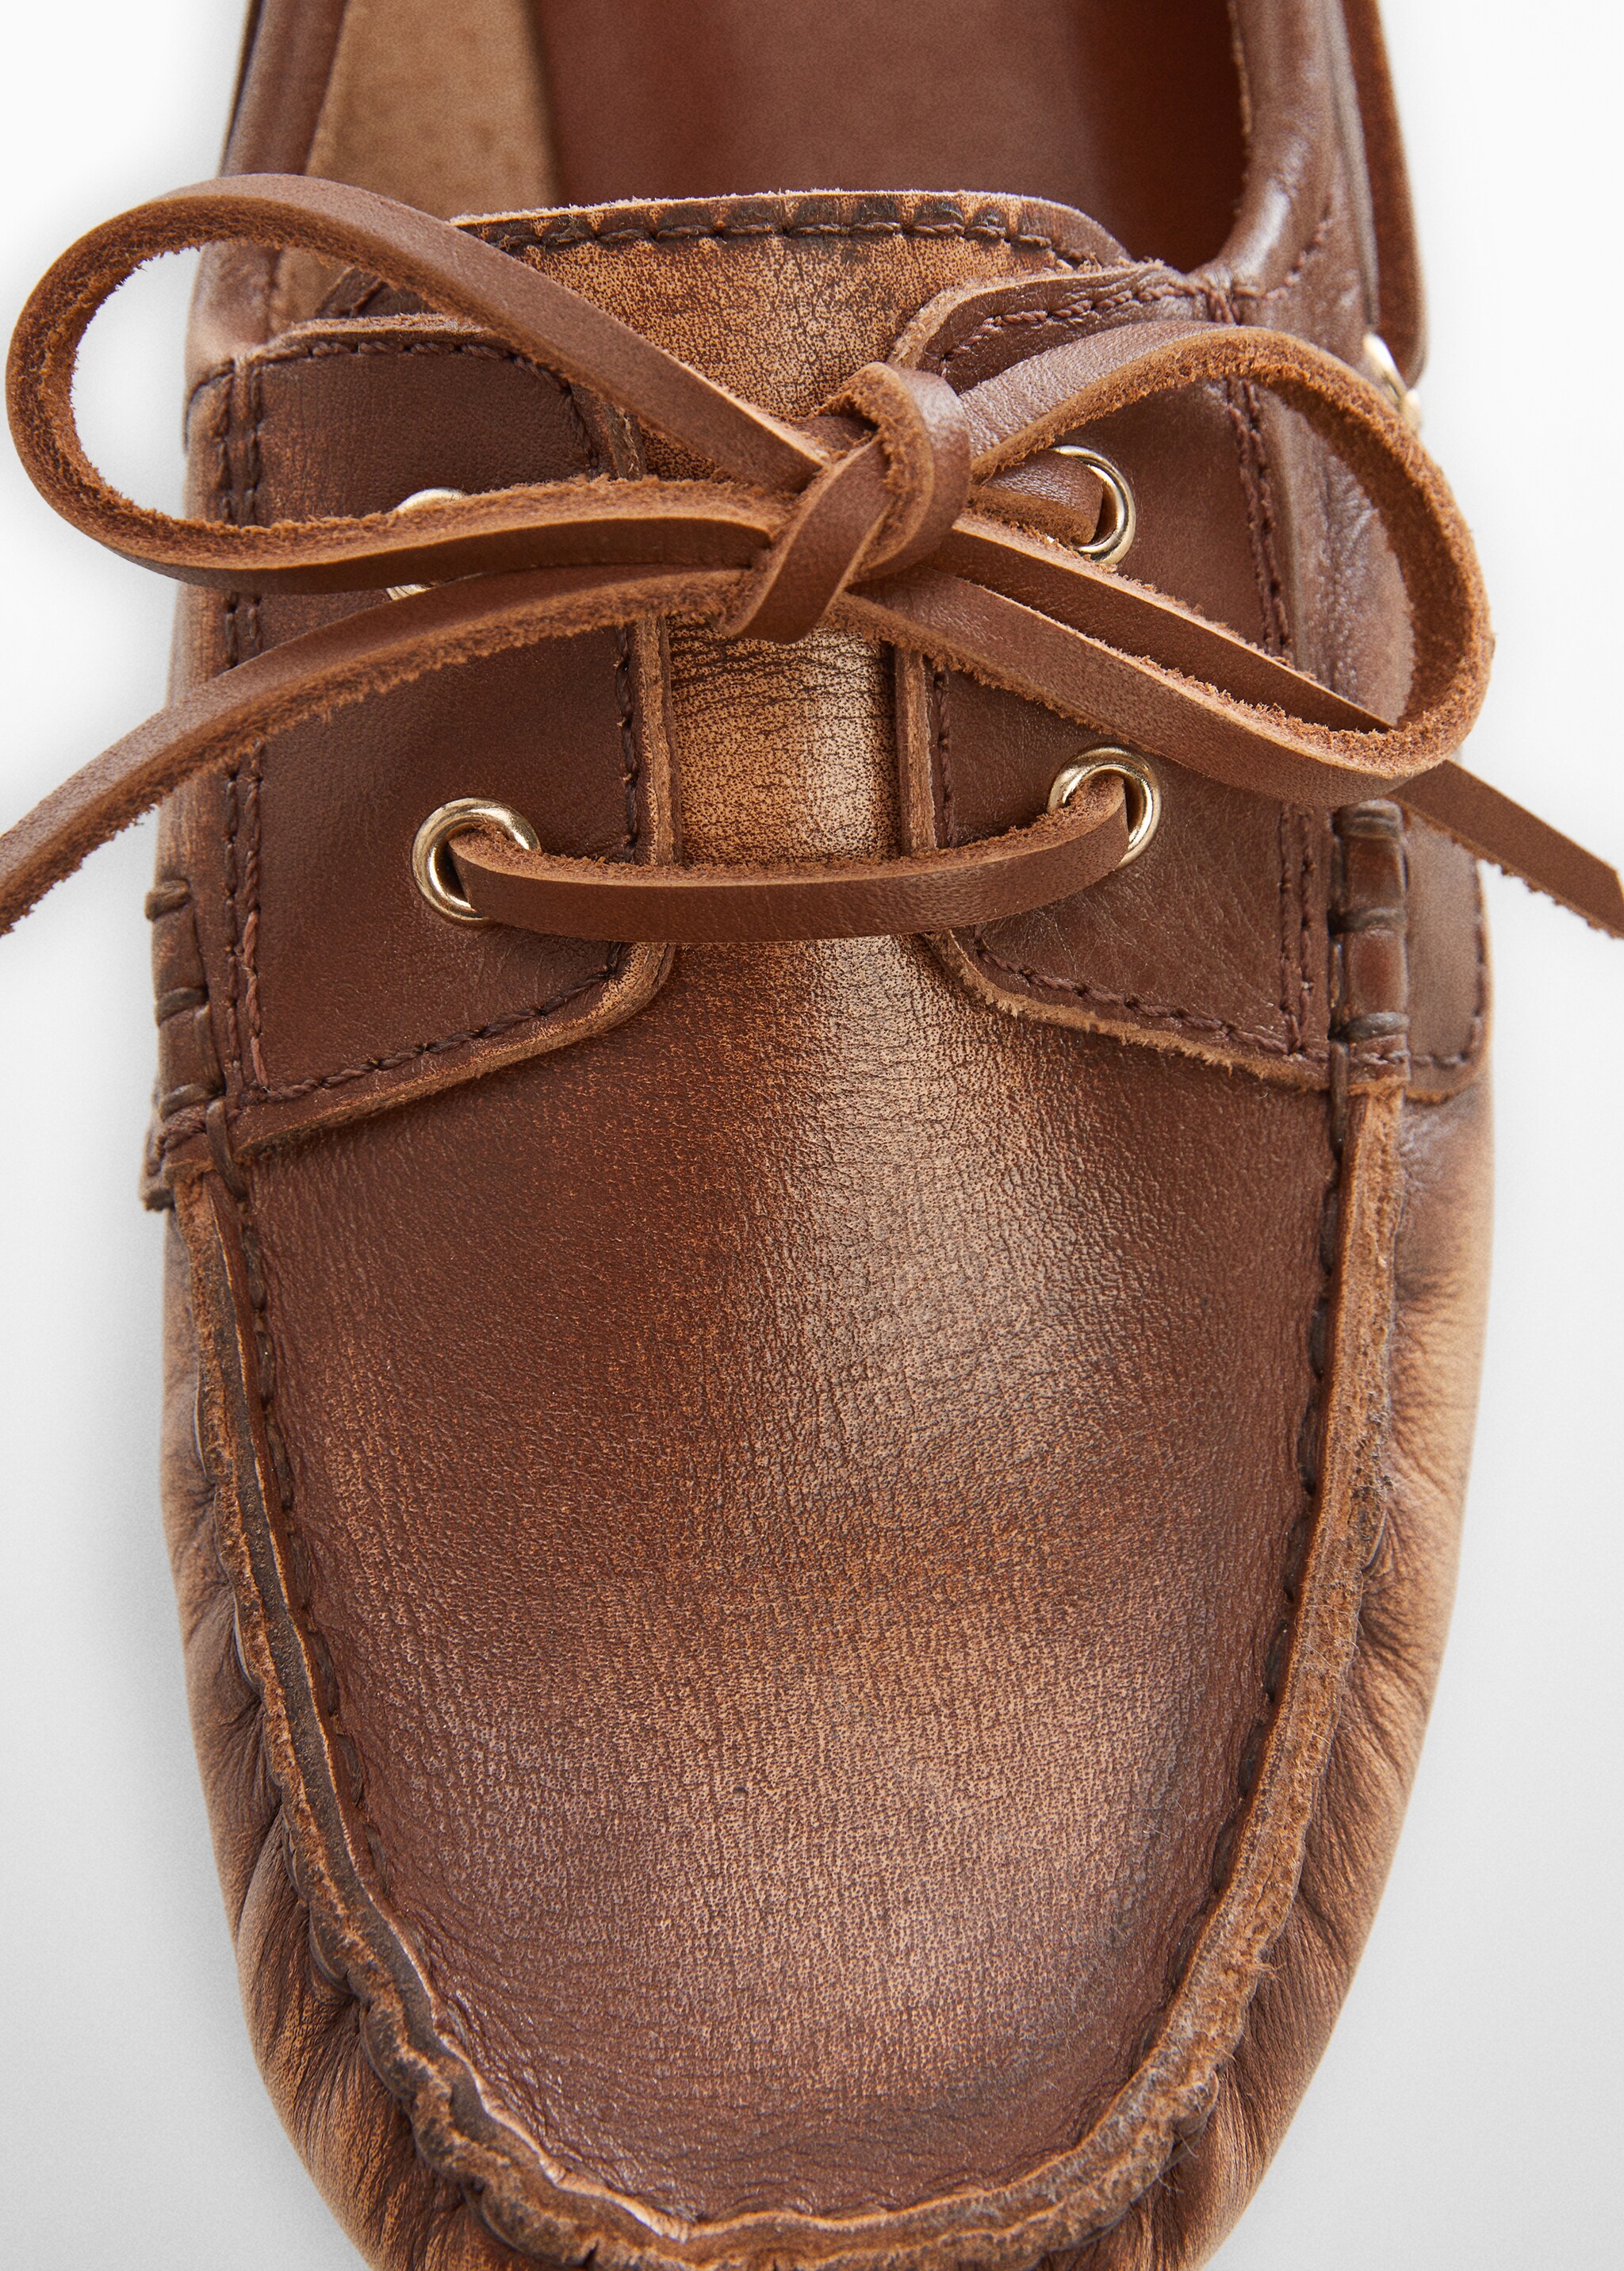 Leather boat shoes - Details of the article 1